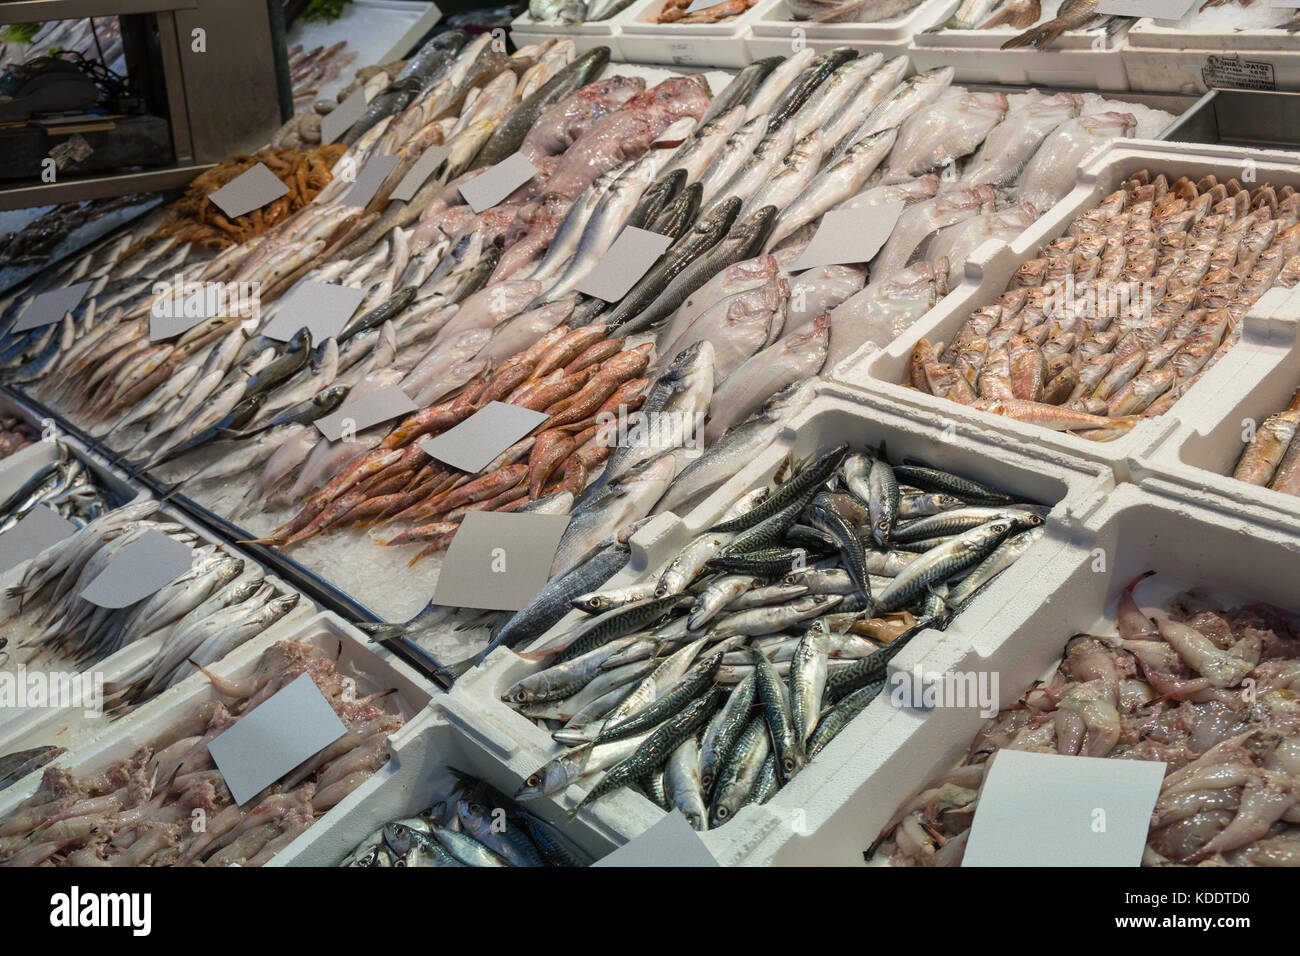 Assortment of fresh fish on ice at the seafood market with empty price tags Stock Photo